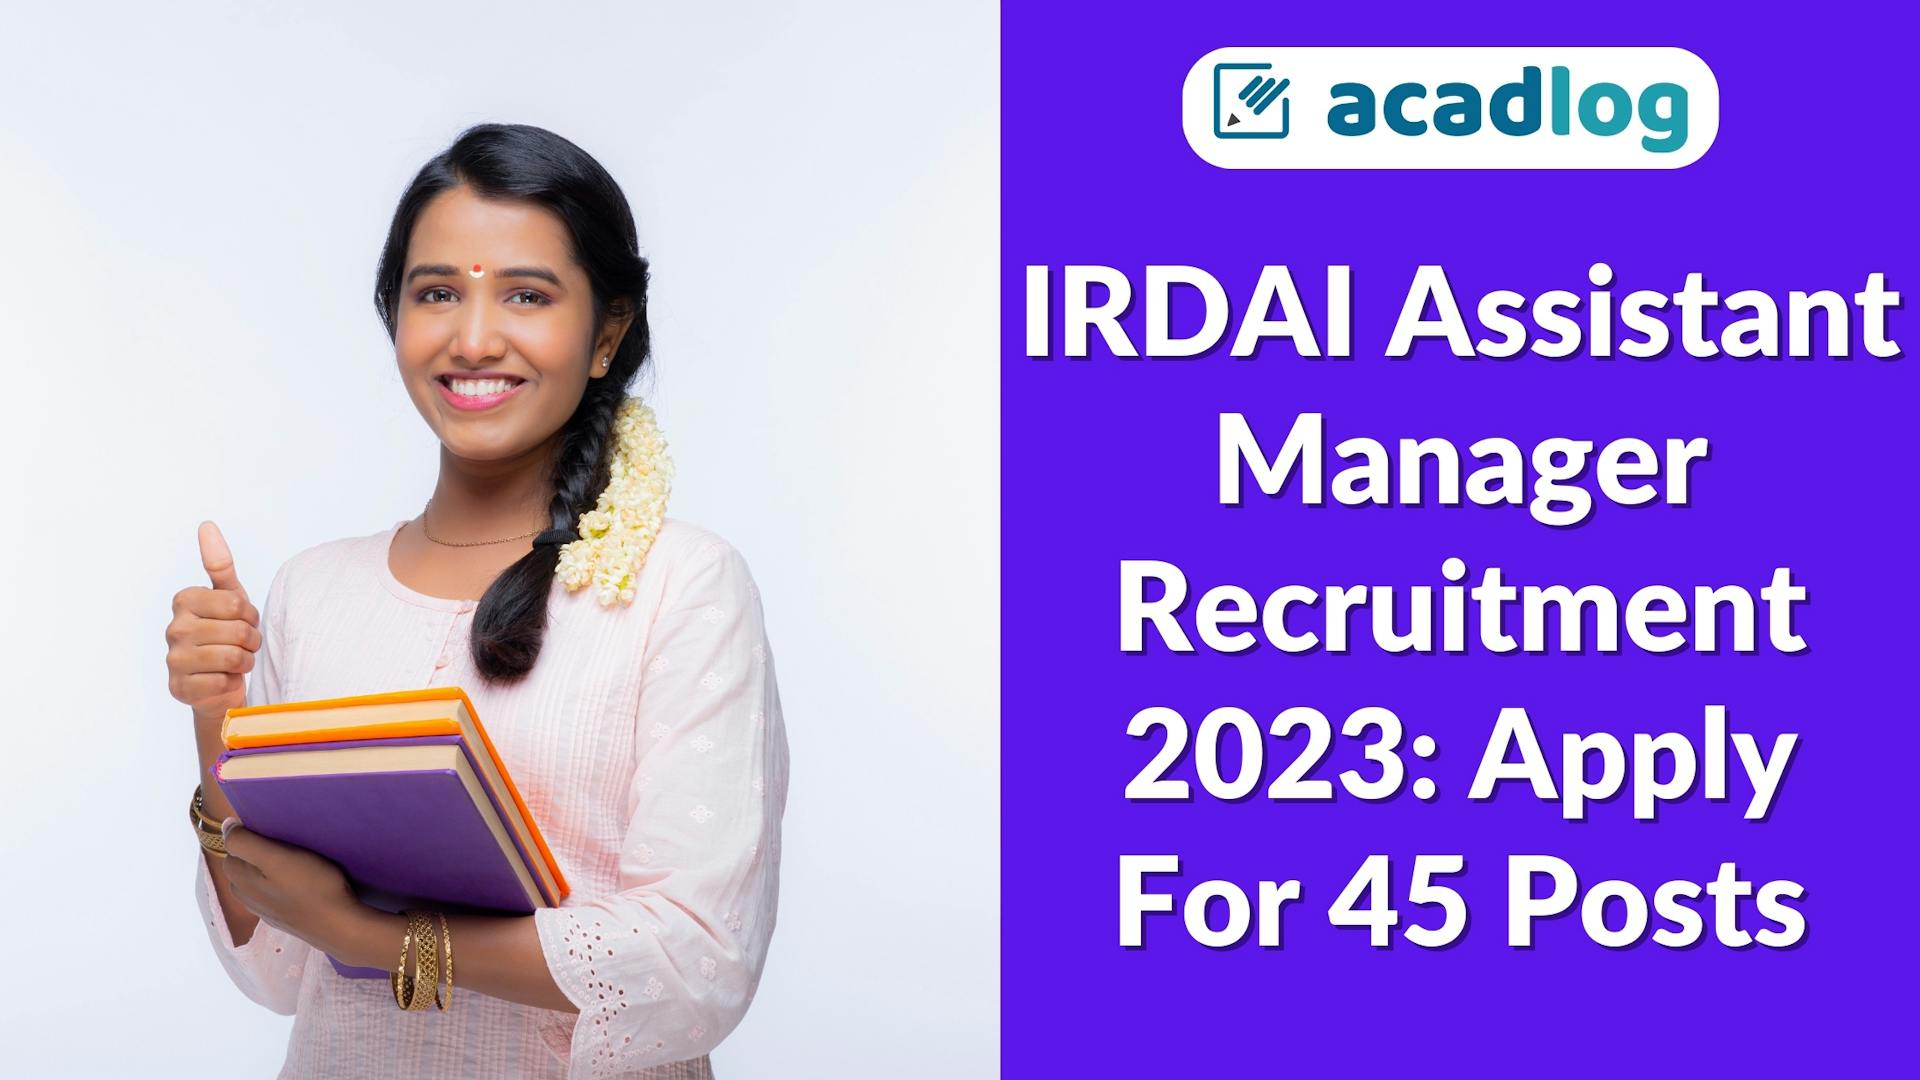 IRDAI Assistant Manager Recruitment 2023: Apply for 45 Posts